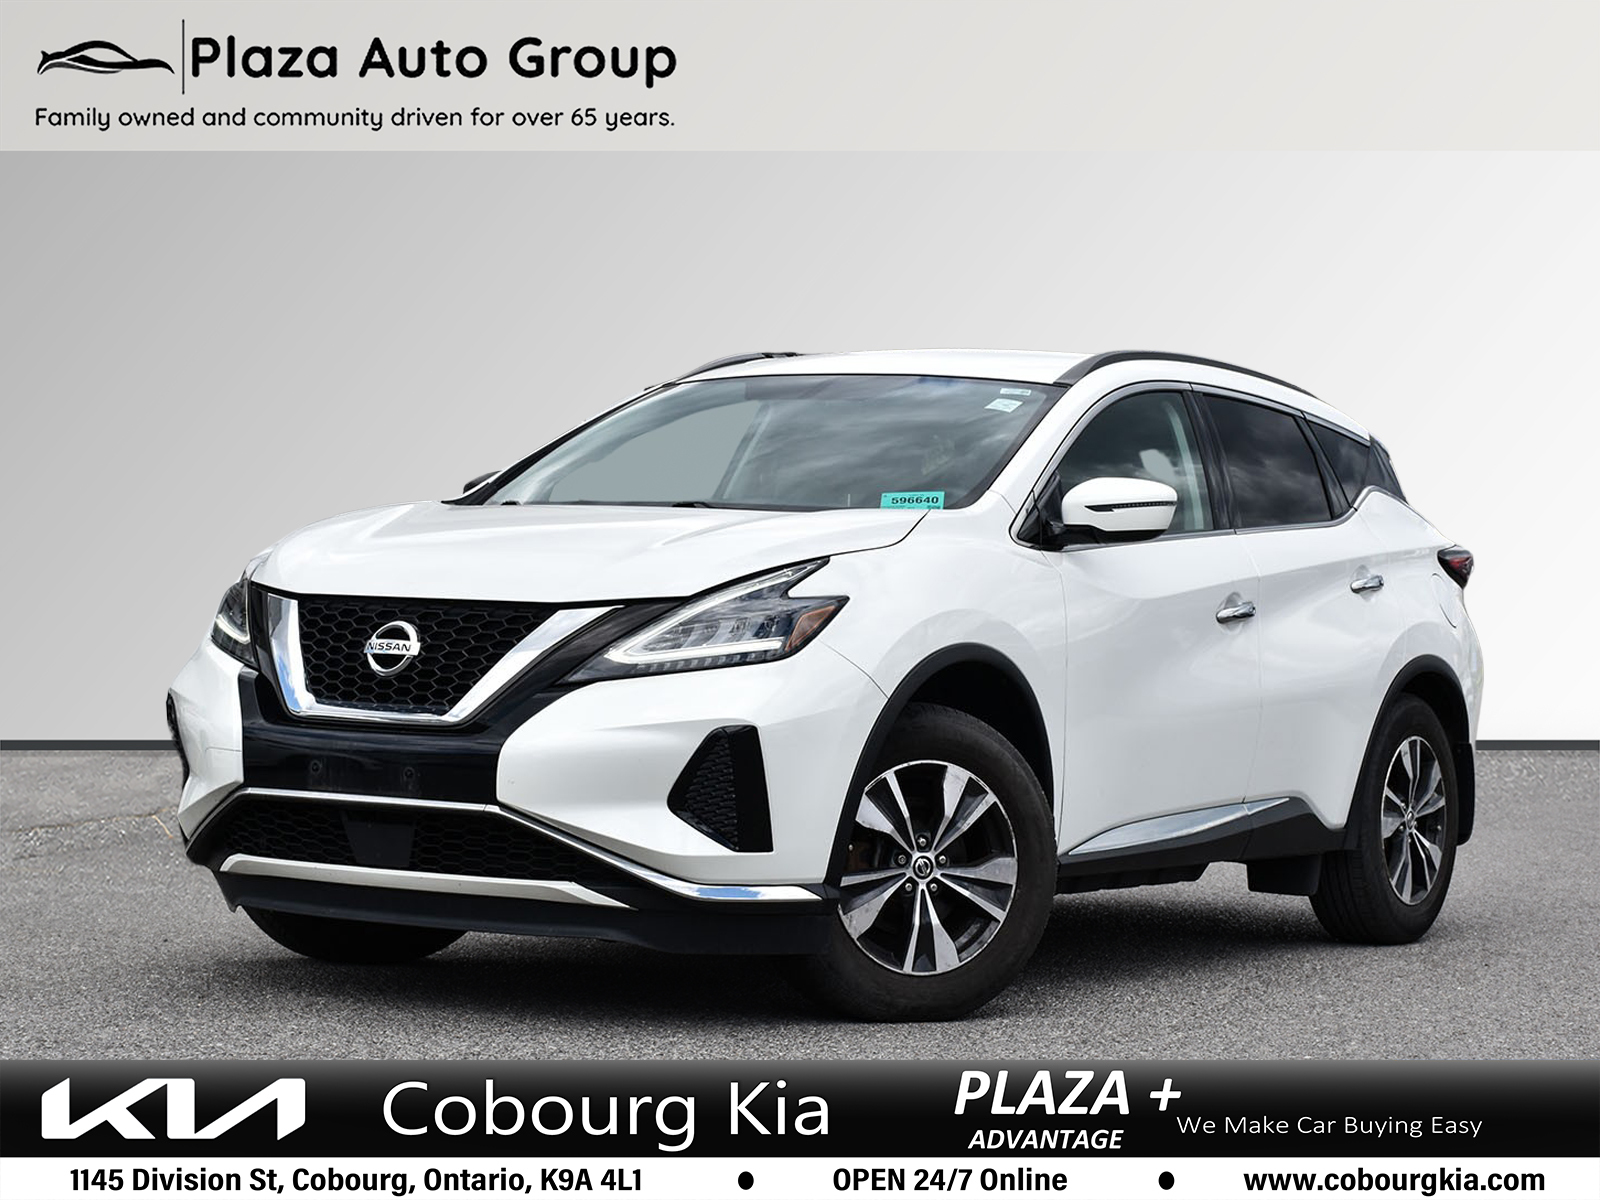 2019 Nissan Murano S 4dr Front-Wheel Drive